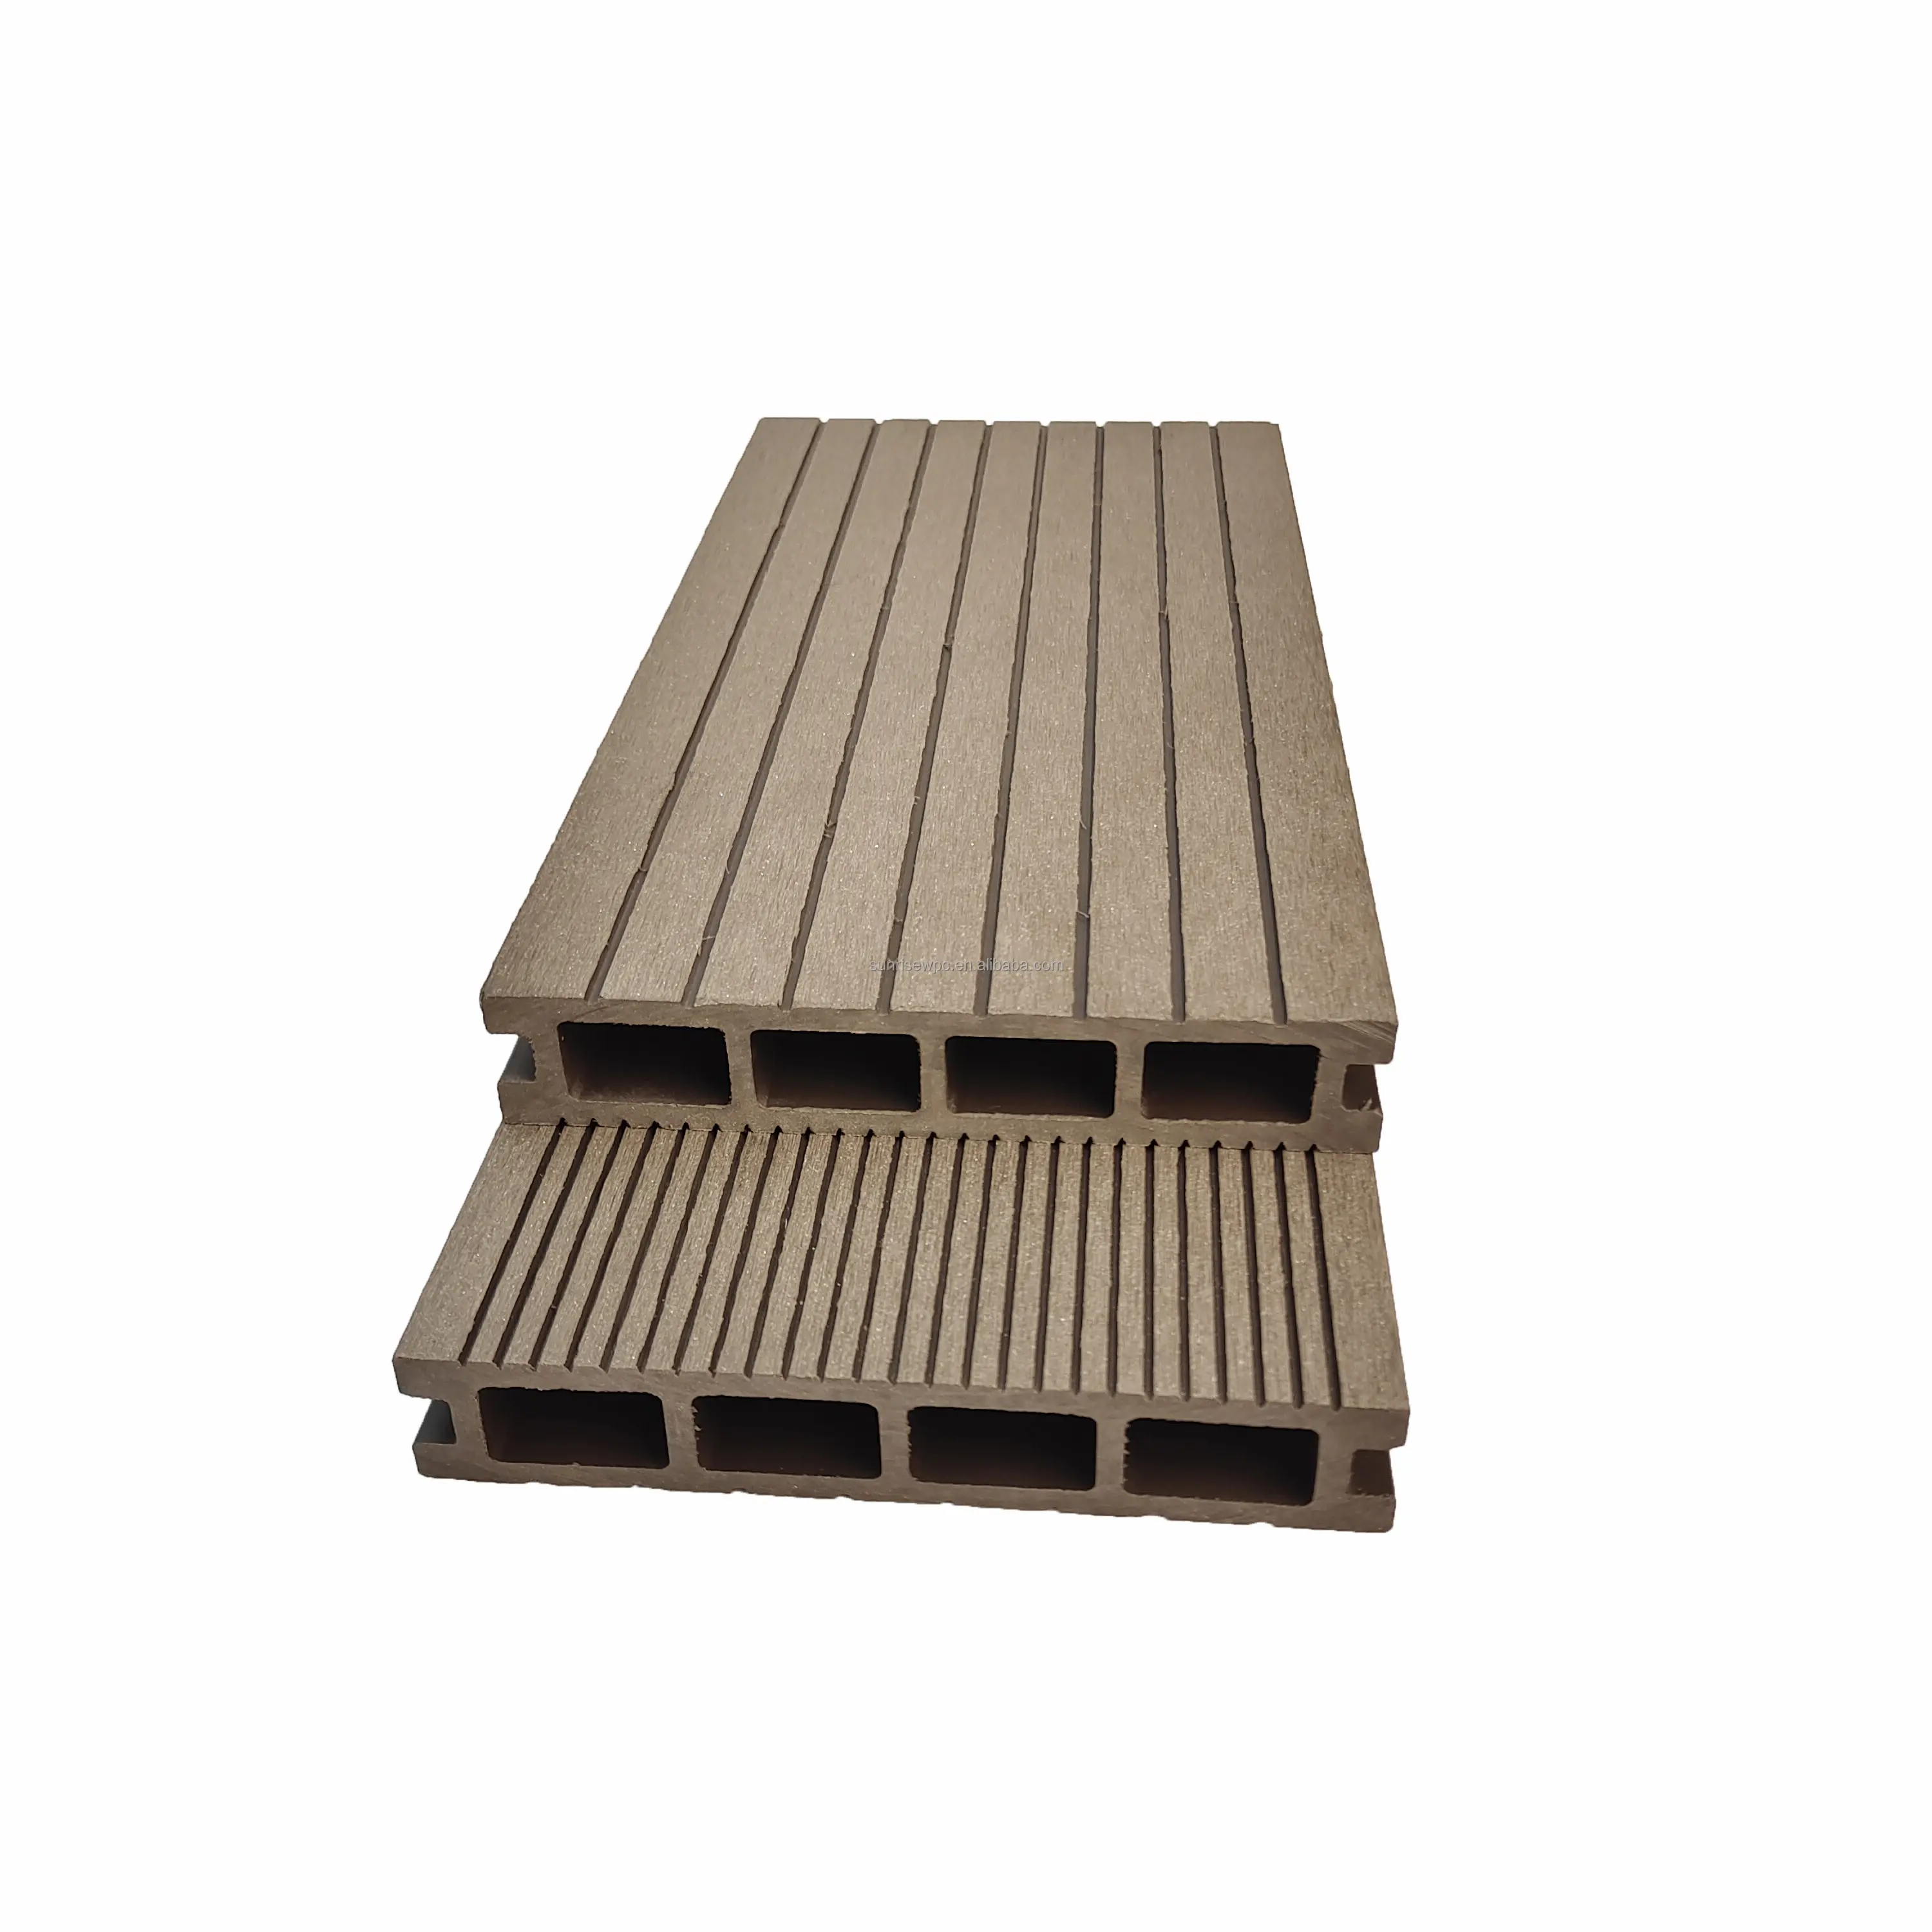 Manufacture high quality mouldproof fireproof non fading composite exterior wpc decking